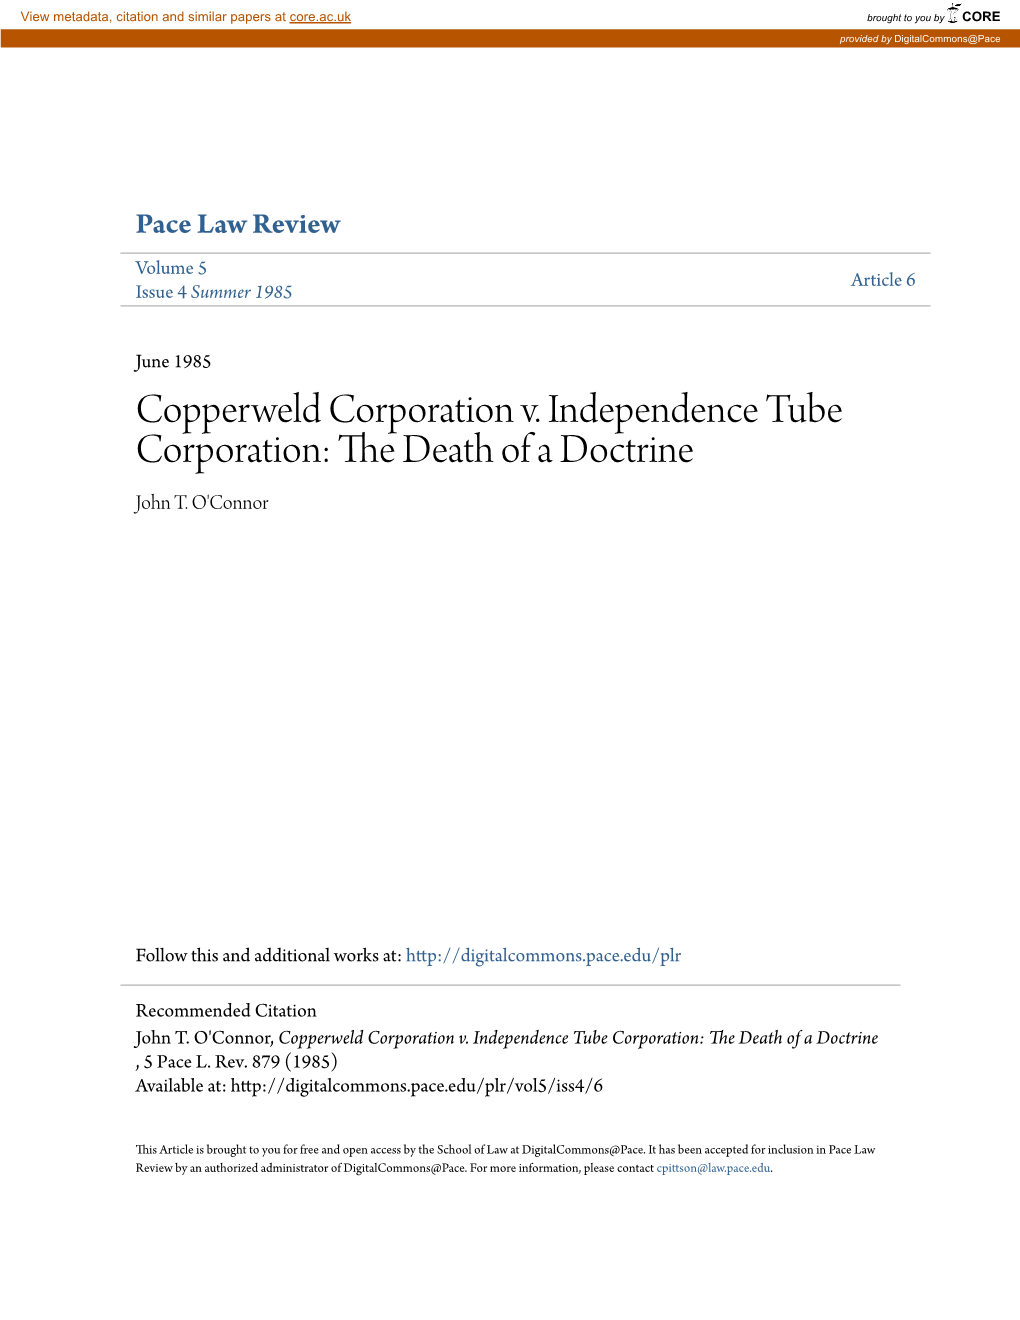 Copperweld Corporation V. Independence Tube Corporation: the Ed Ath of a Doctrine John T